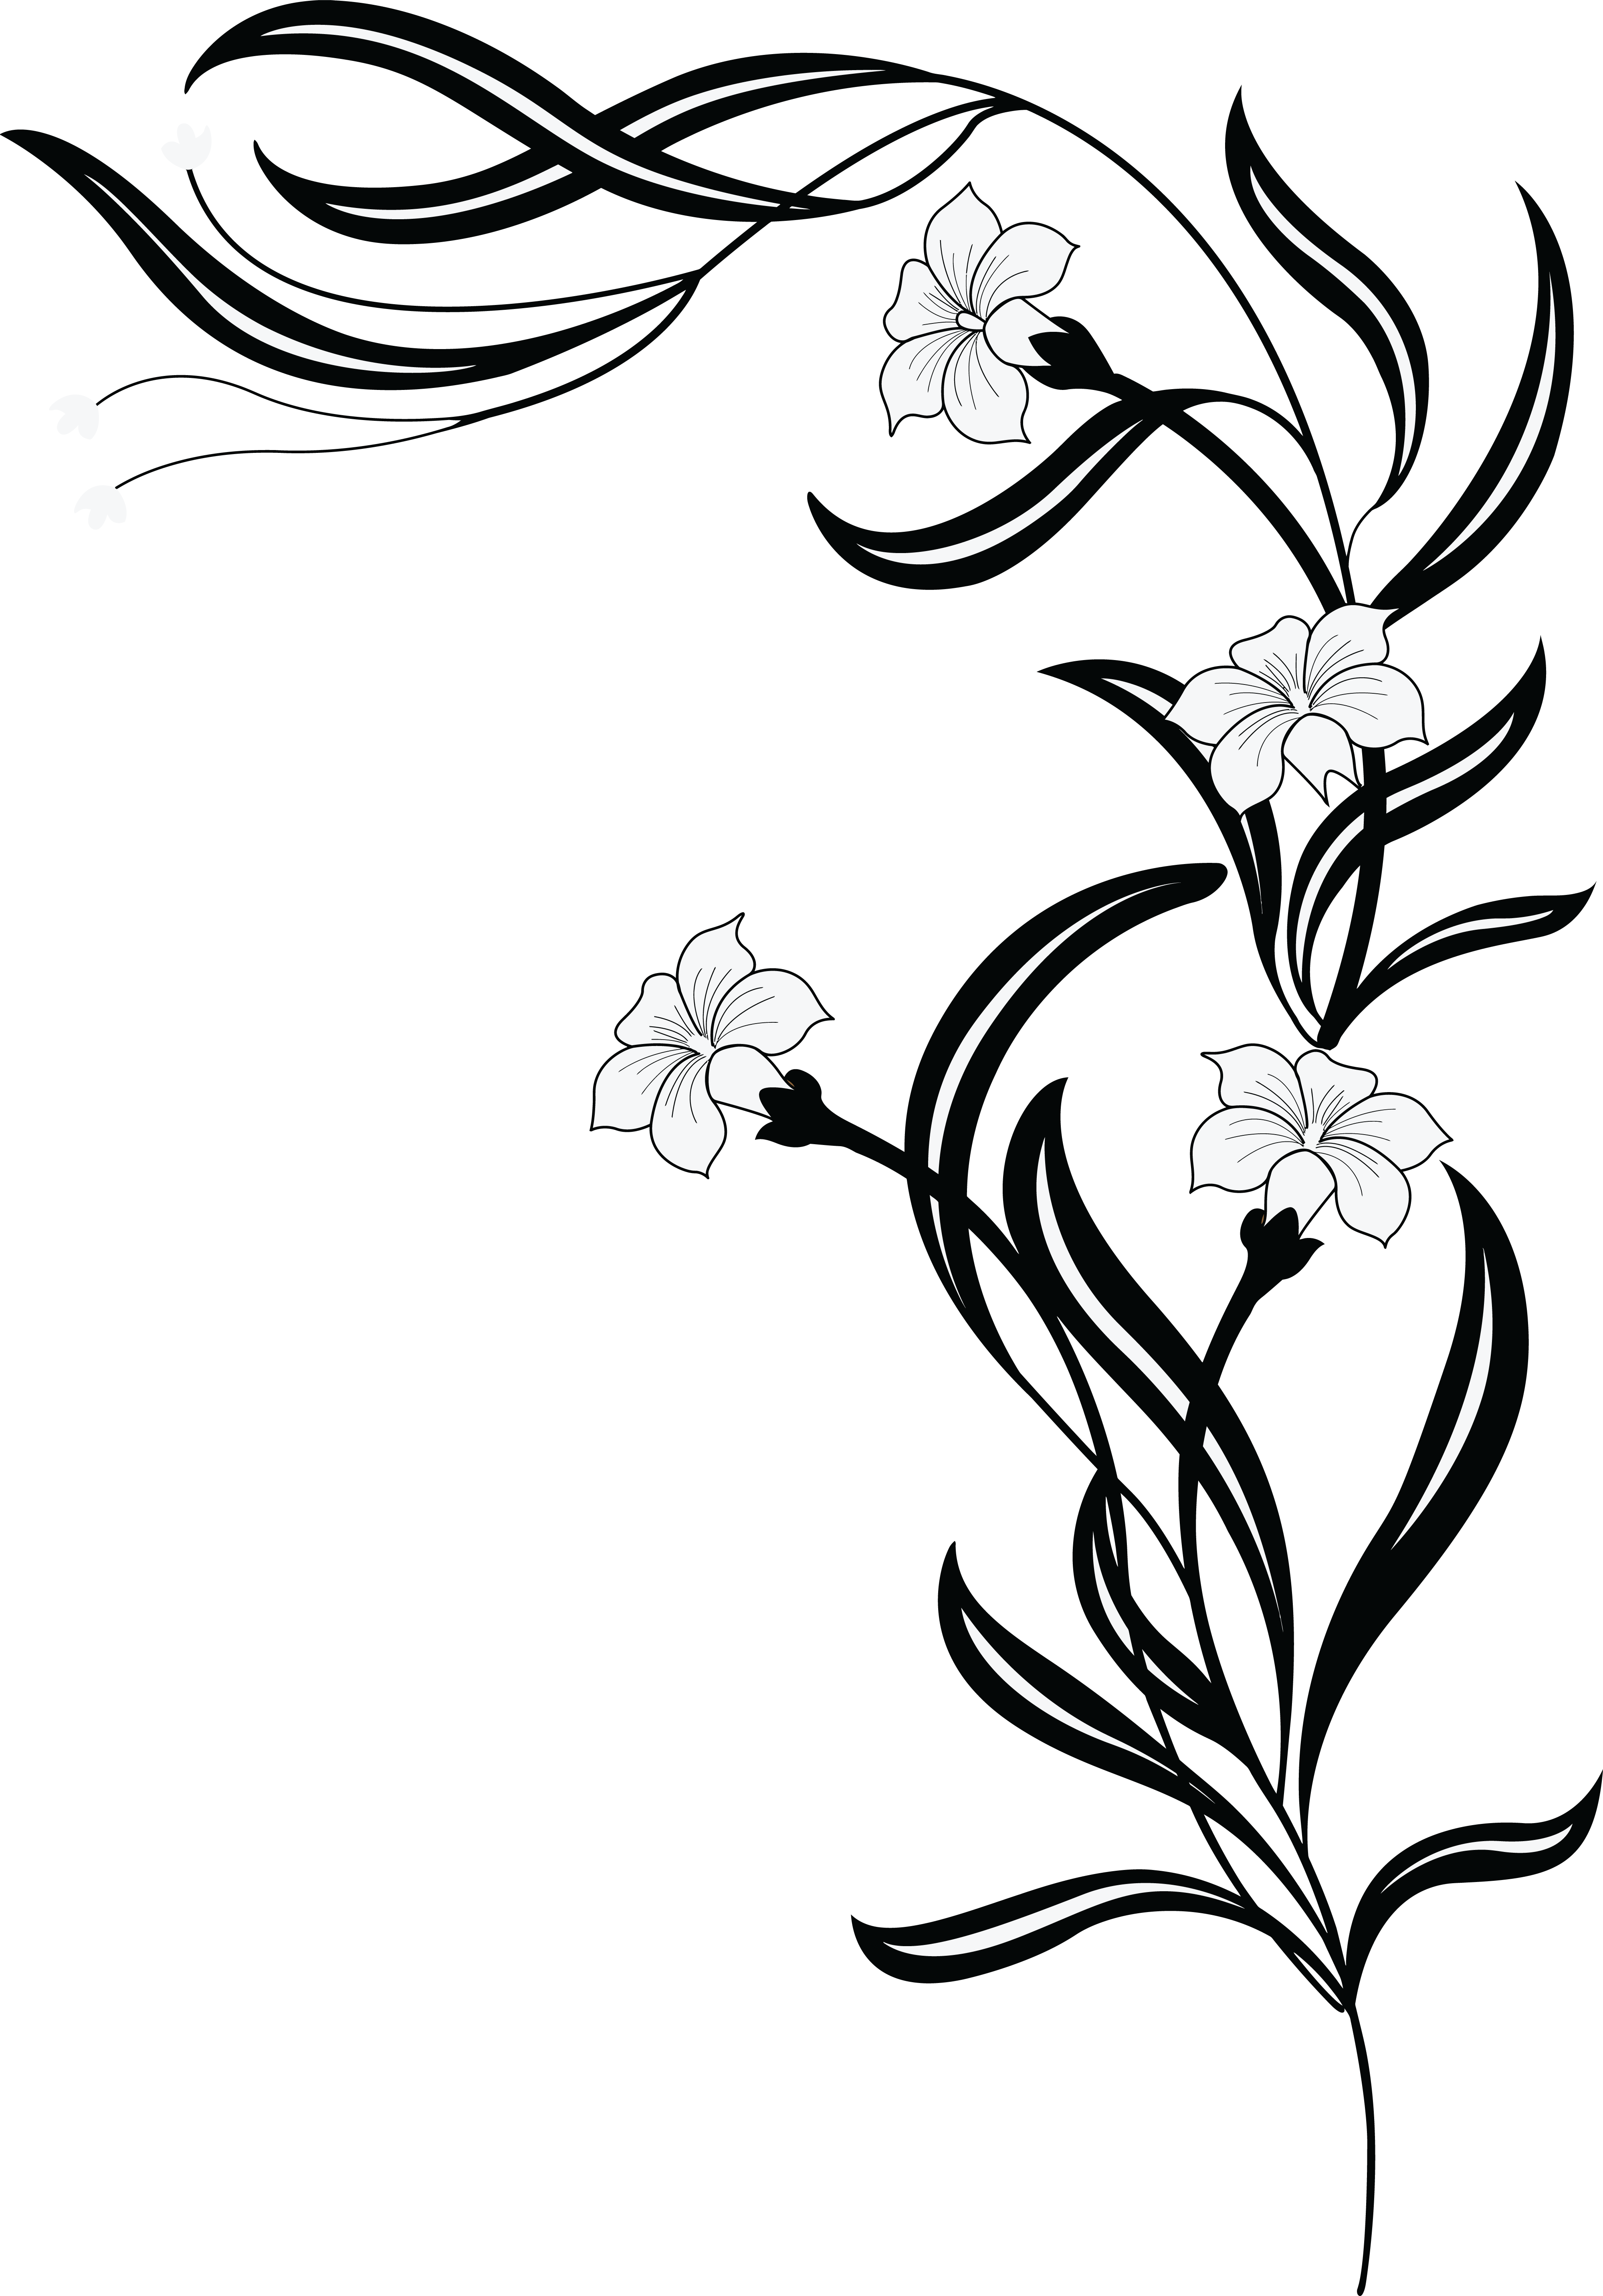 Free Clipart Of A grayscale floral vine